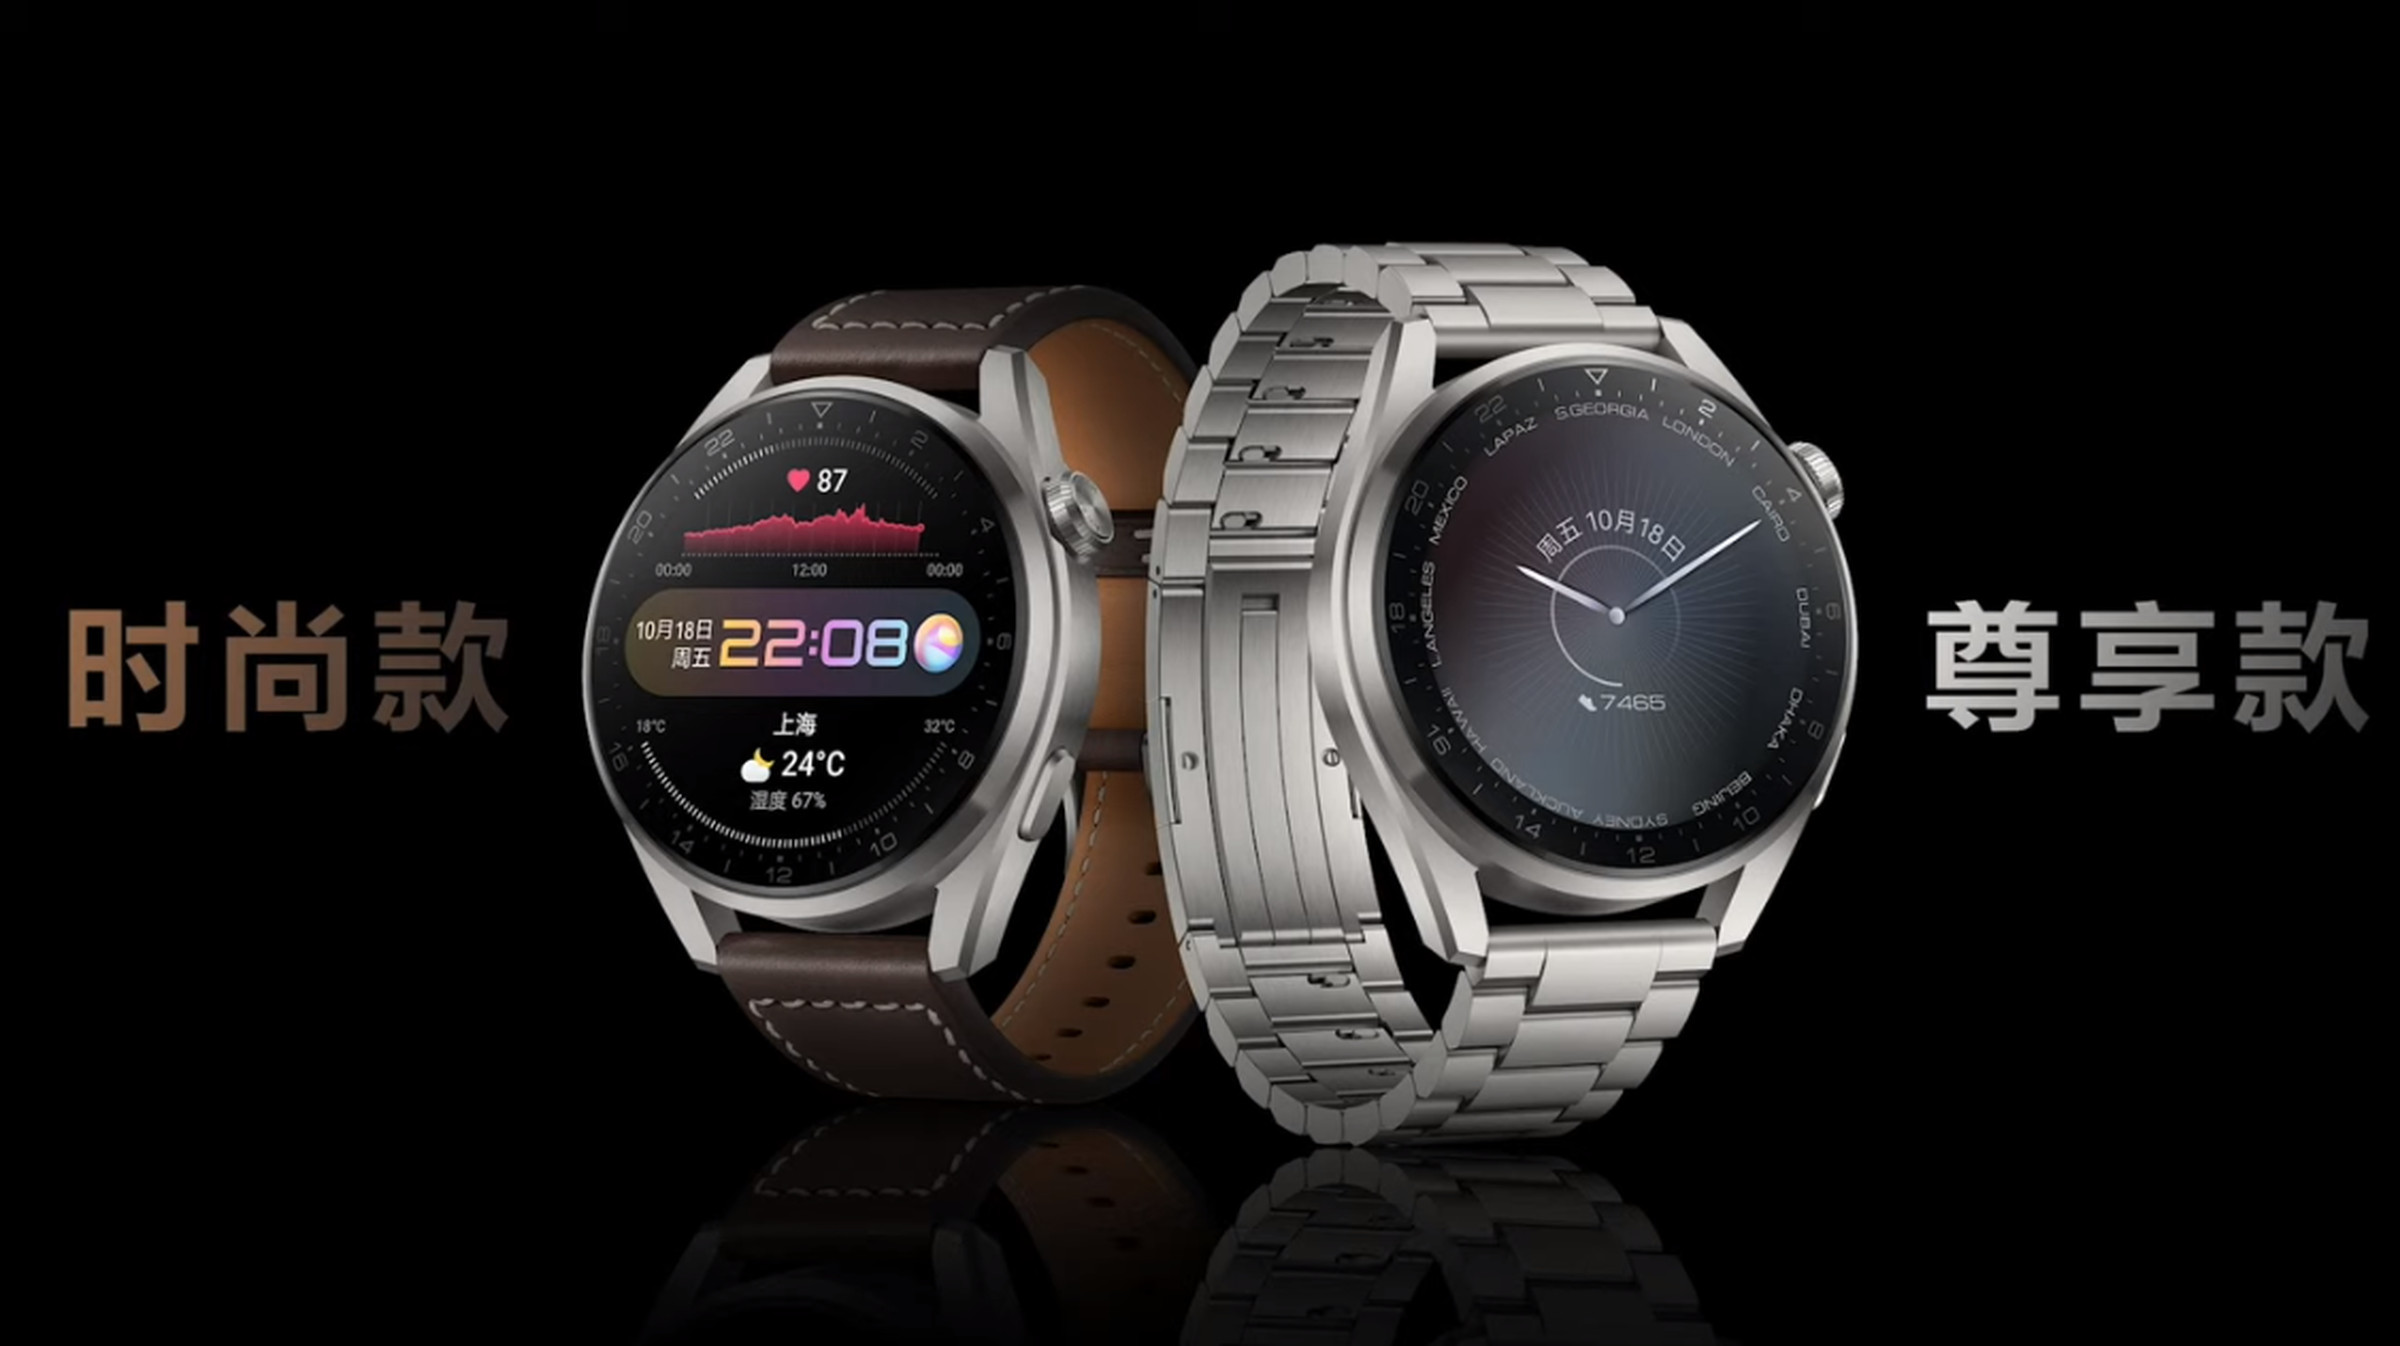 The Huawei Watch Pro 3 has better battery life and more accurate location tracking.